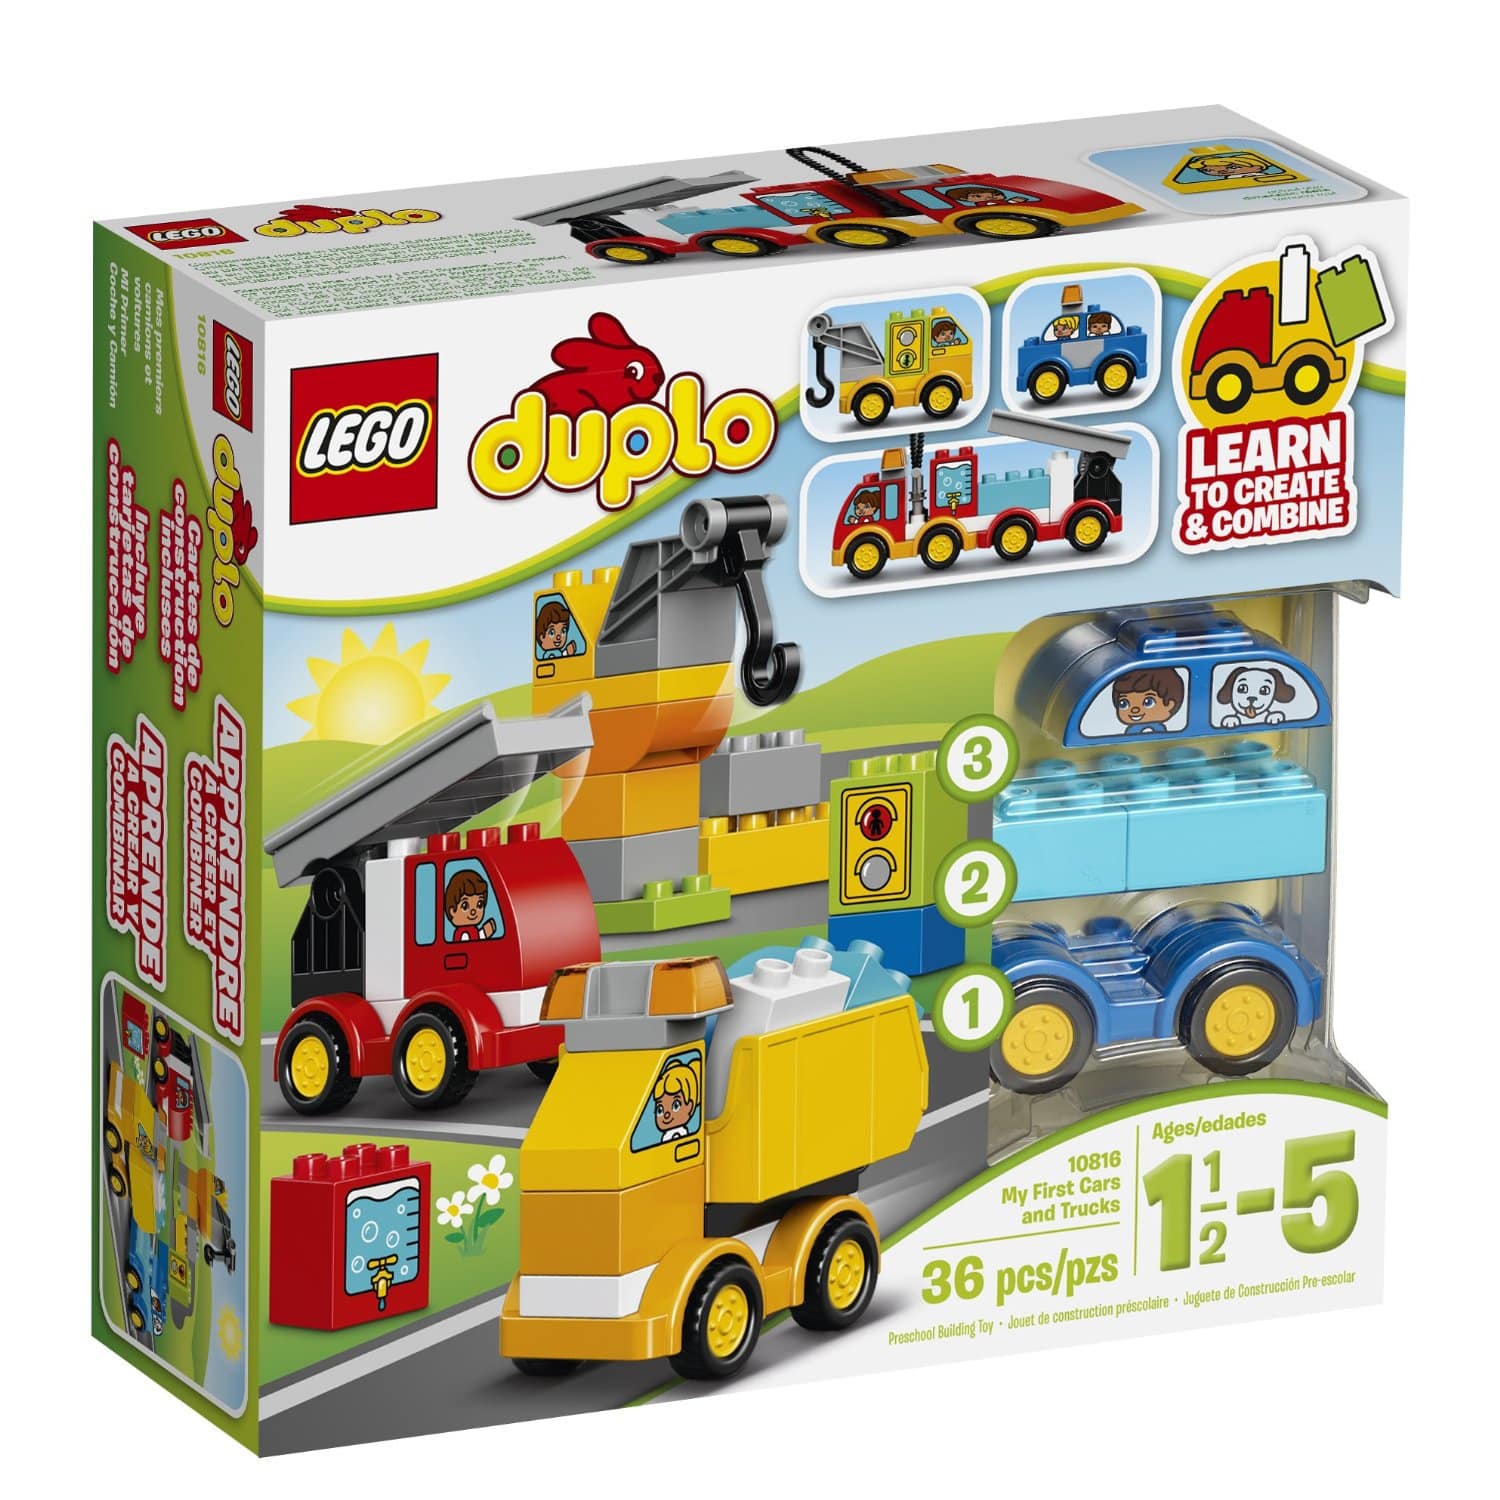 DEAL ALERT: LEGO DUPLO My First Cars and Trucks Educational Preschool Toy Building Blocks For Your Toddler